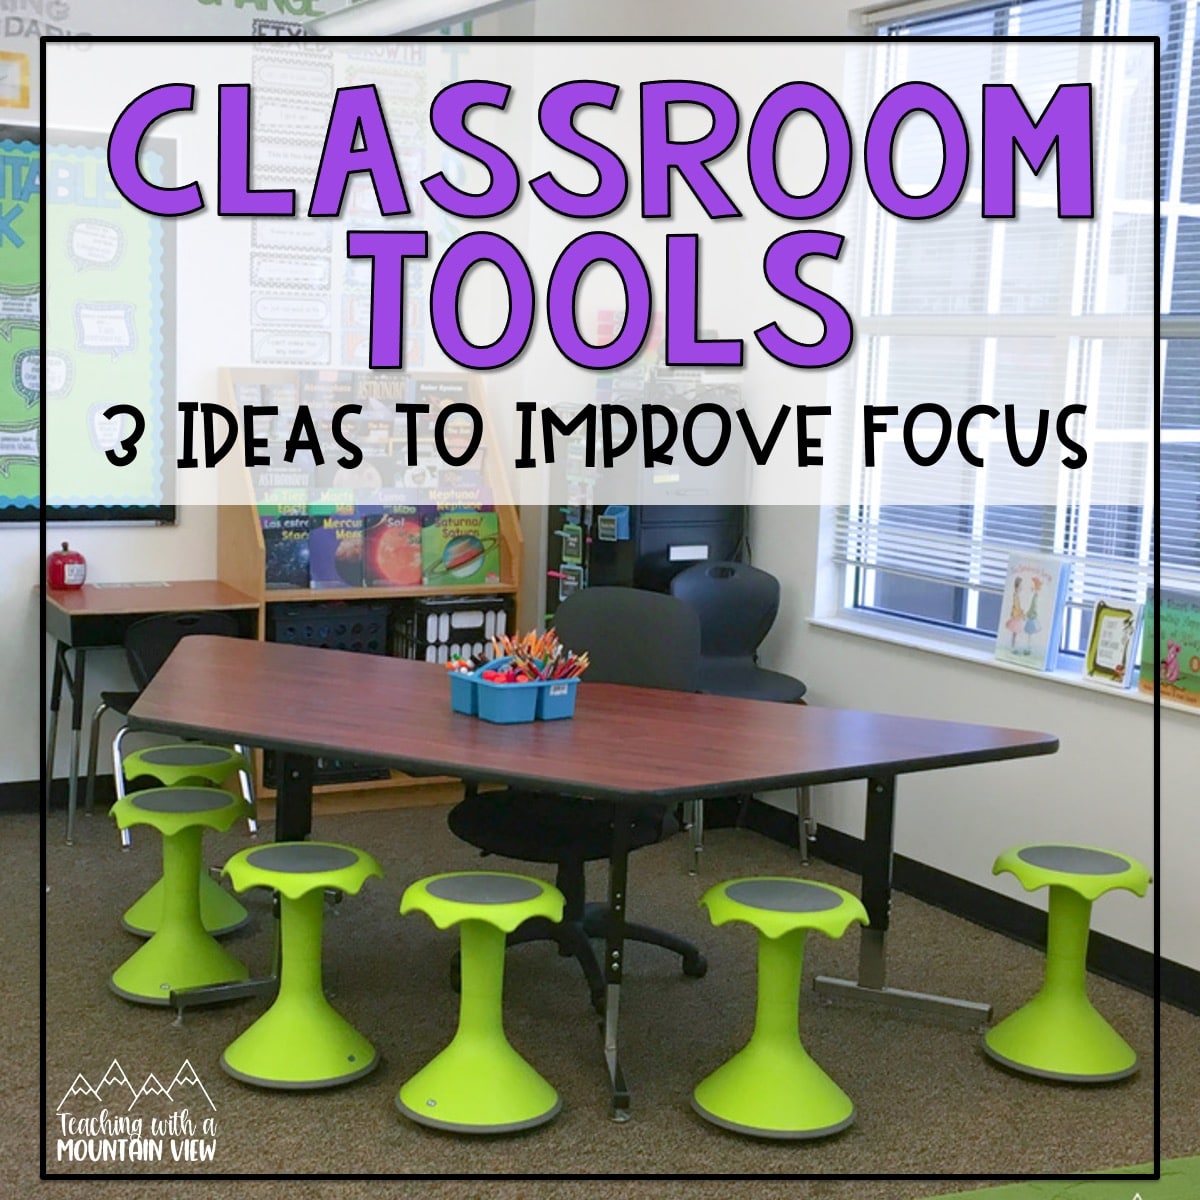 Improve students' focus with these classroom tools. Includes ideas for fidgets in the classroom, flexible seating, and positive reinforcement.